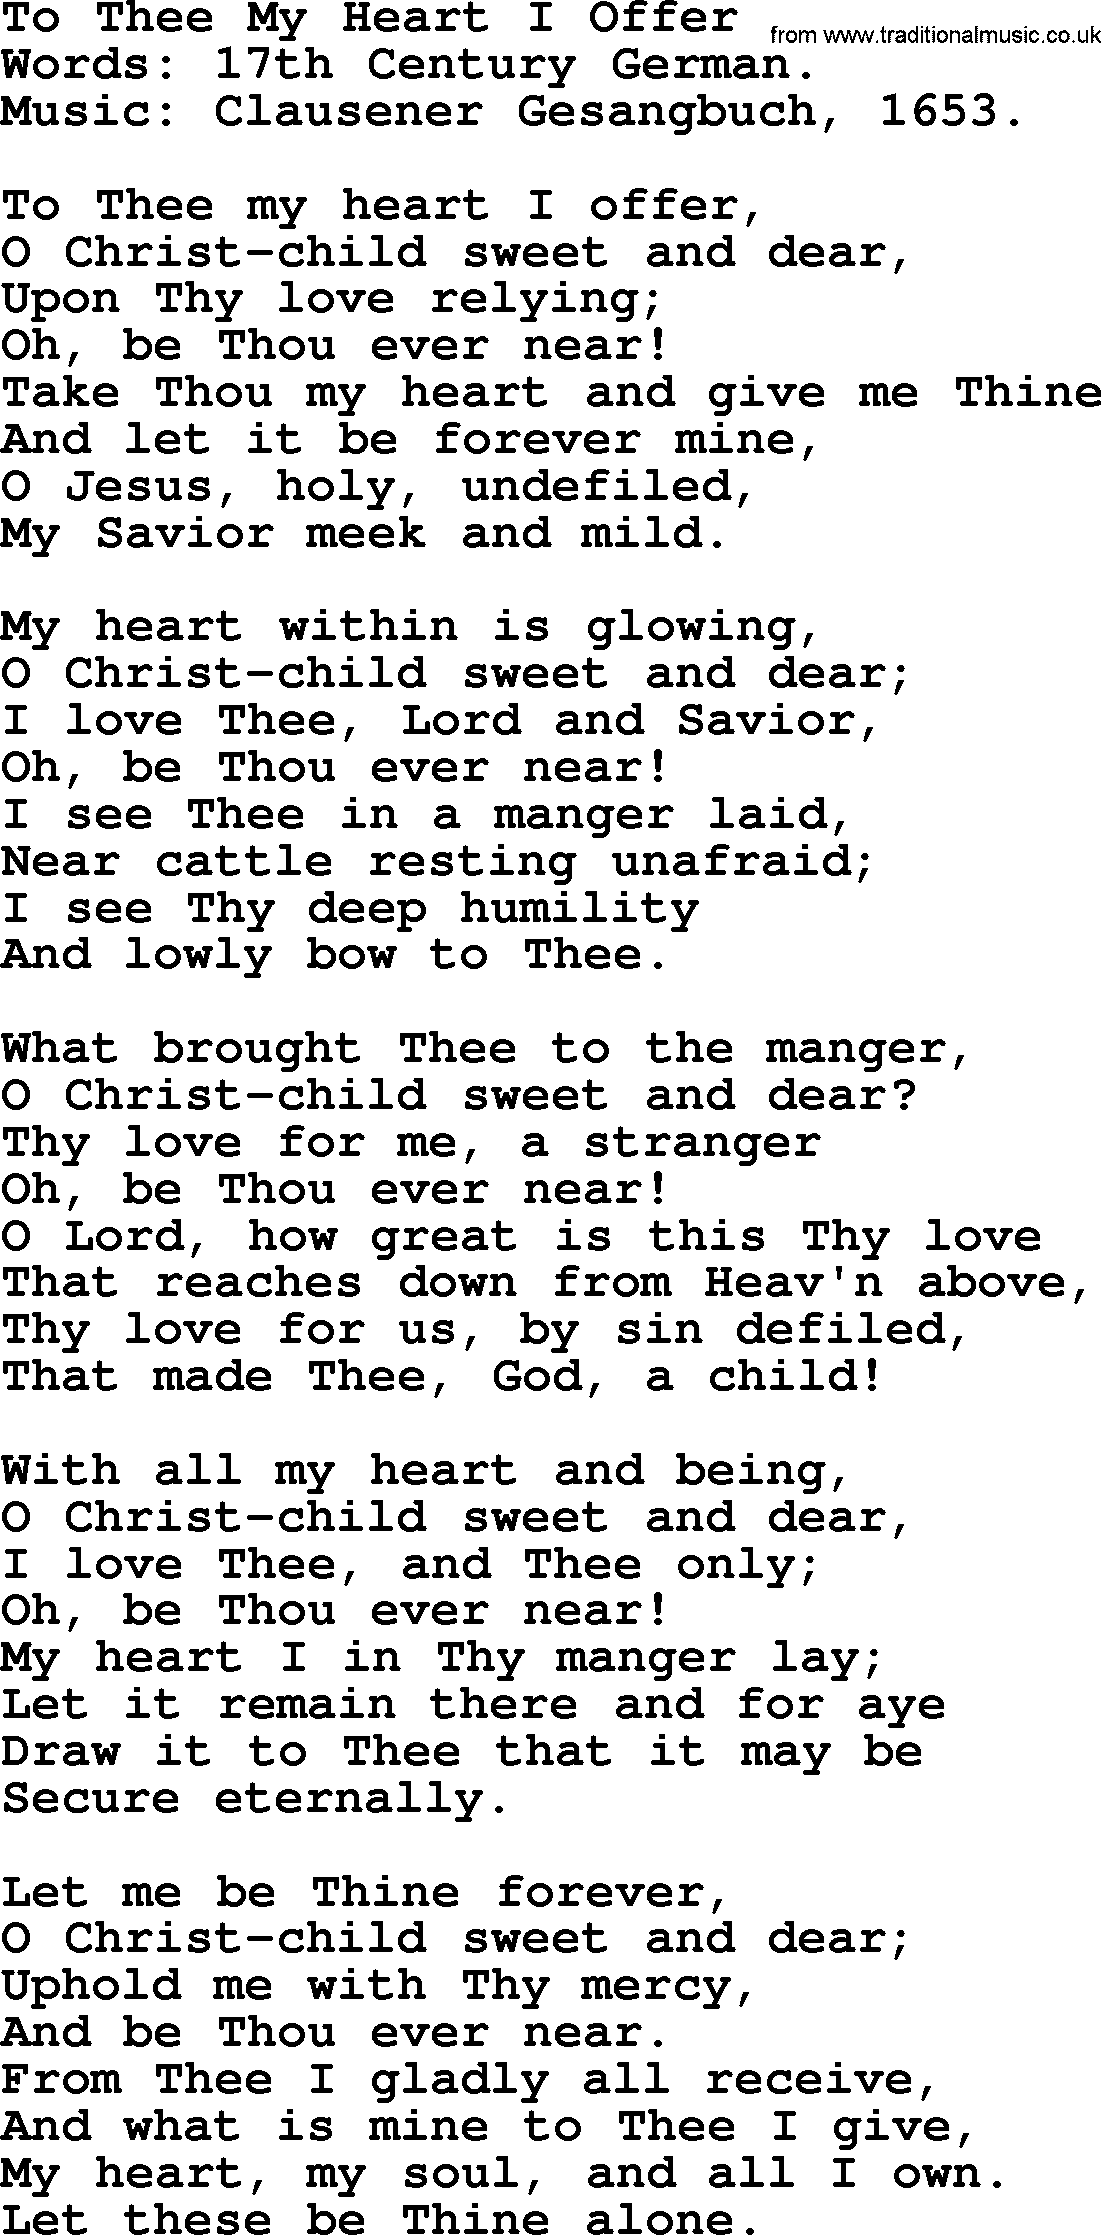 Christmas Hymns, Carols and Songs, title: To Thee My Heart I Offer, lyrics with PDF